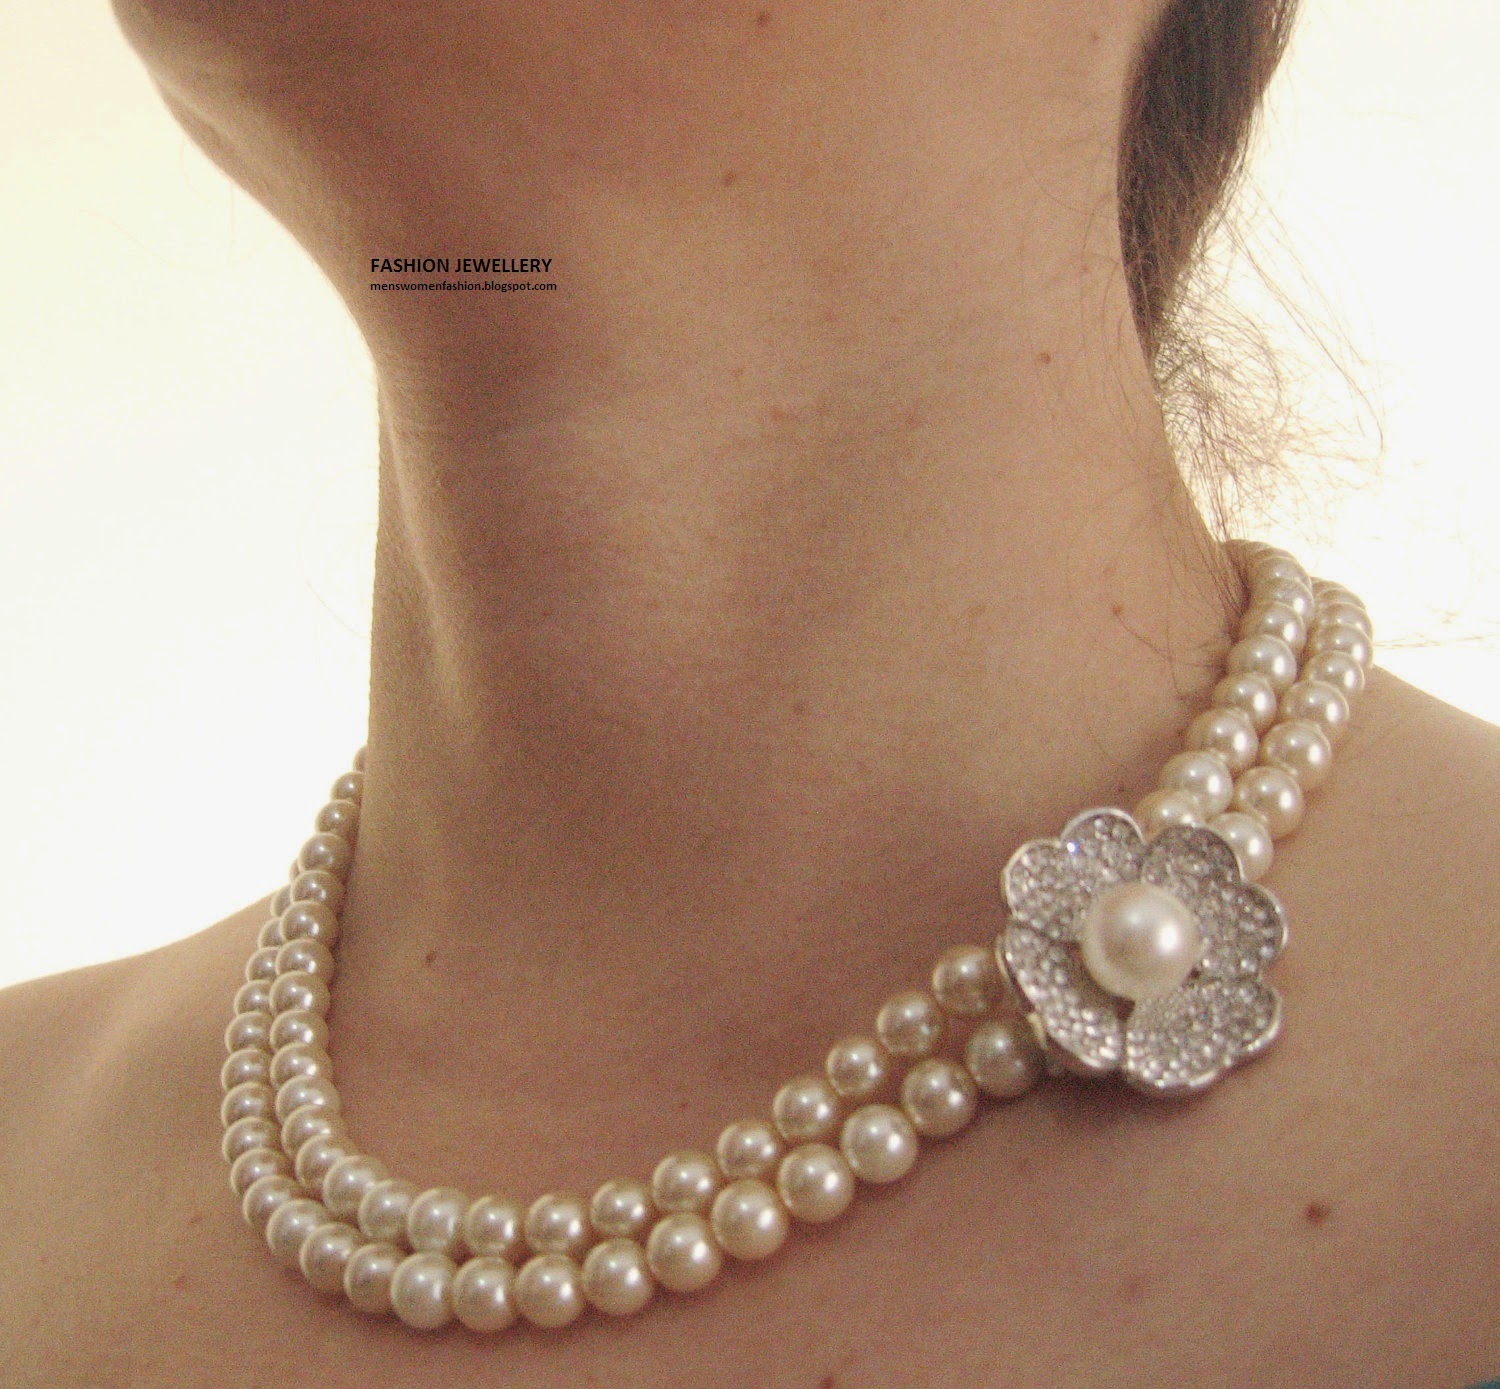 Pearlsâ€™ at Londonâ€™s VA: A History of Luxury and Design